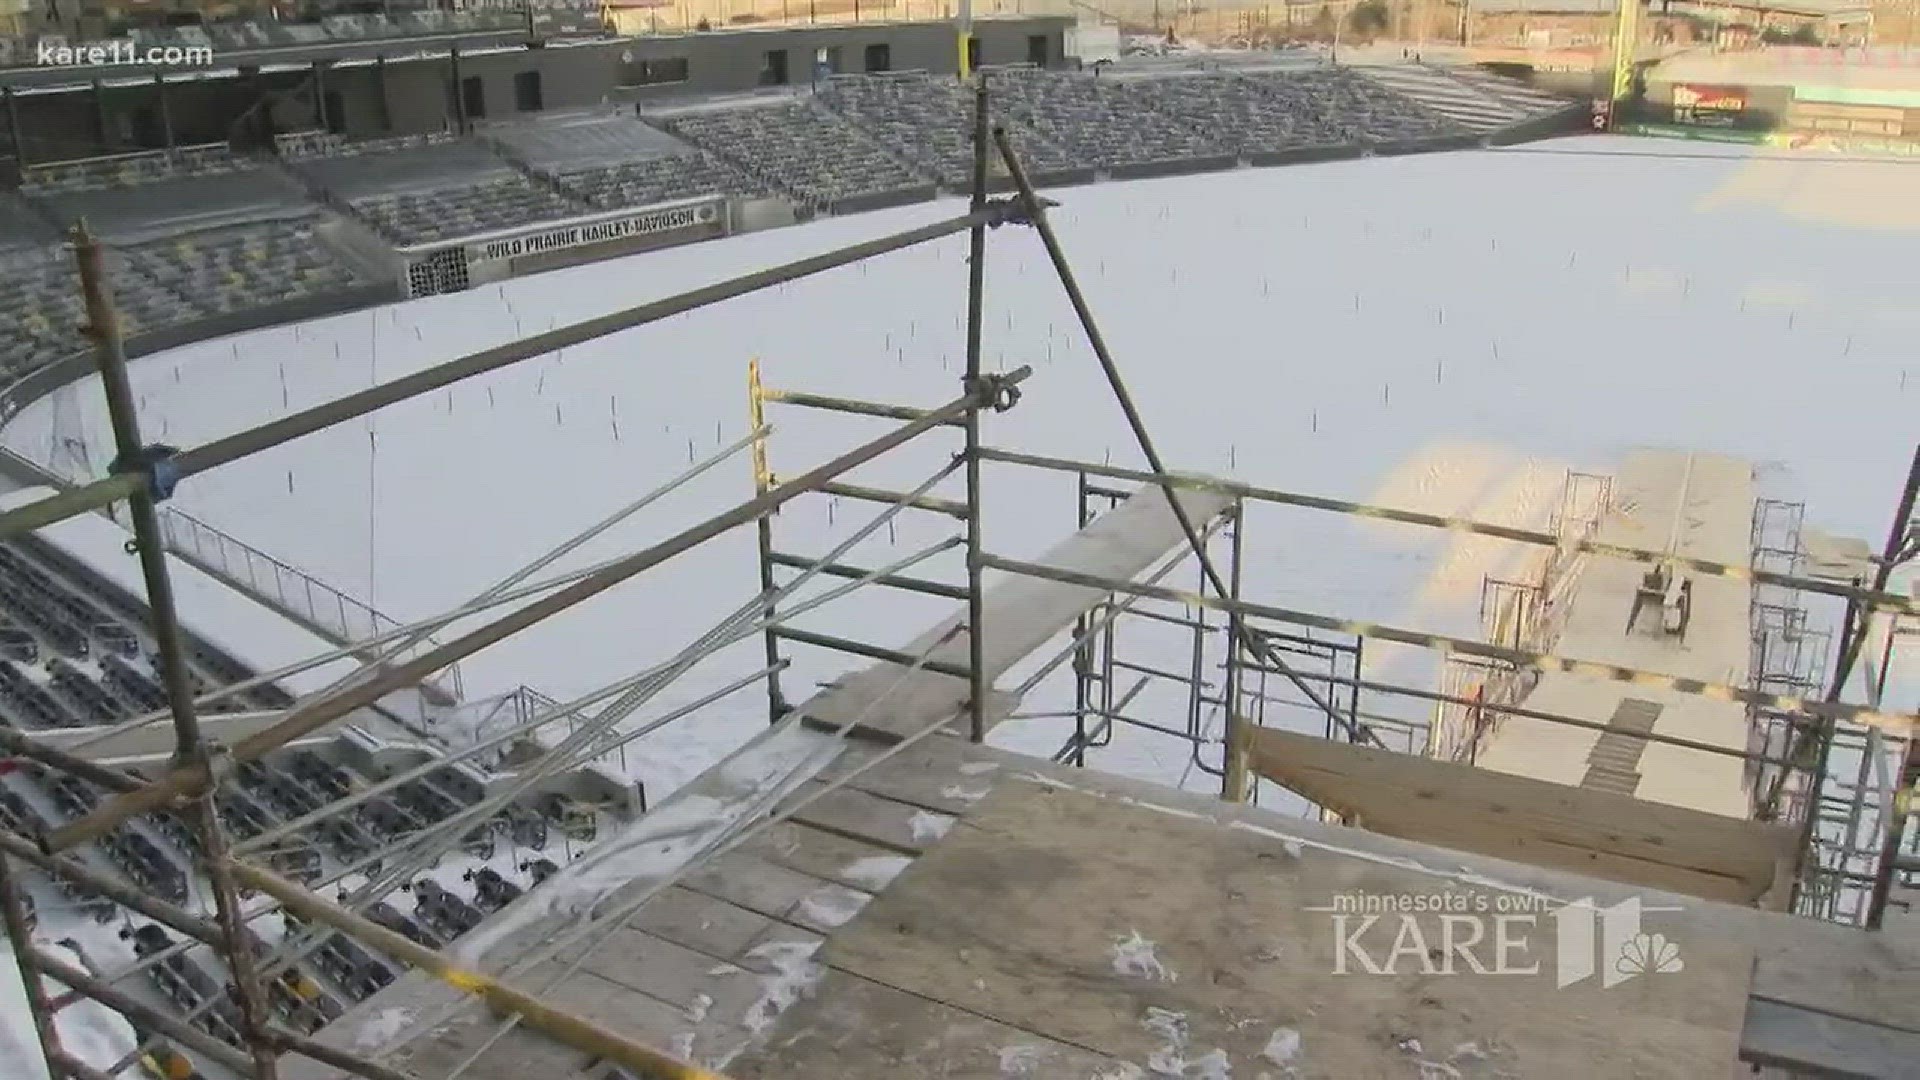 St. Paul is planning a number of outdoor events to coincide with the Super Bowl in Minneapolis, including a giant slide at CHS Field. http://kare11.tv/2CGDDIc